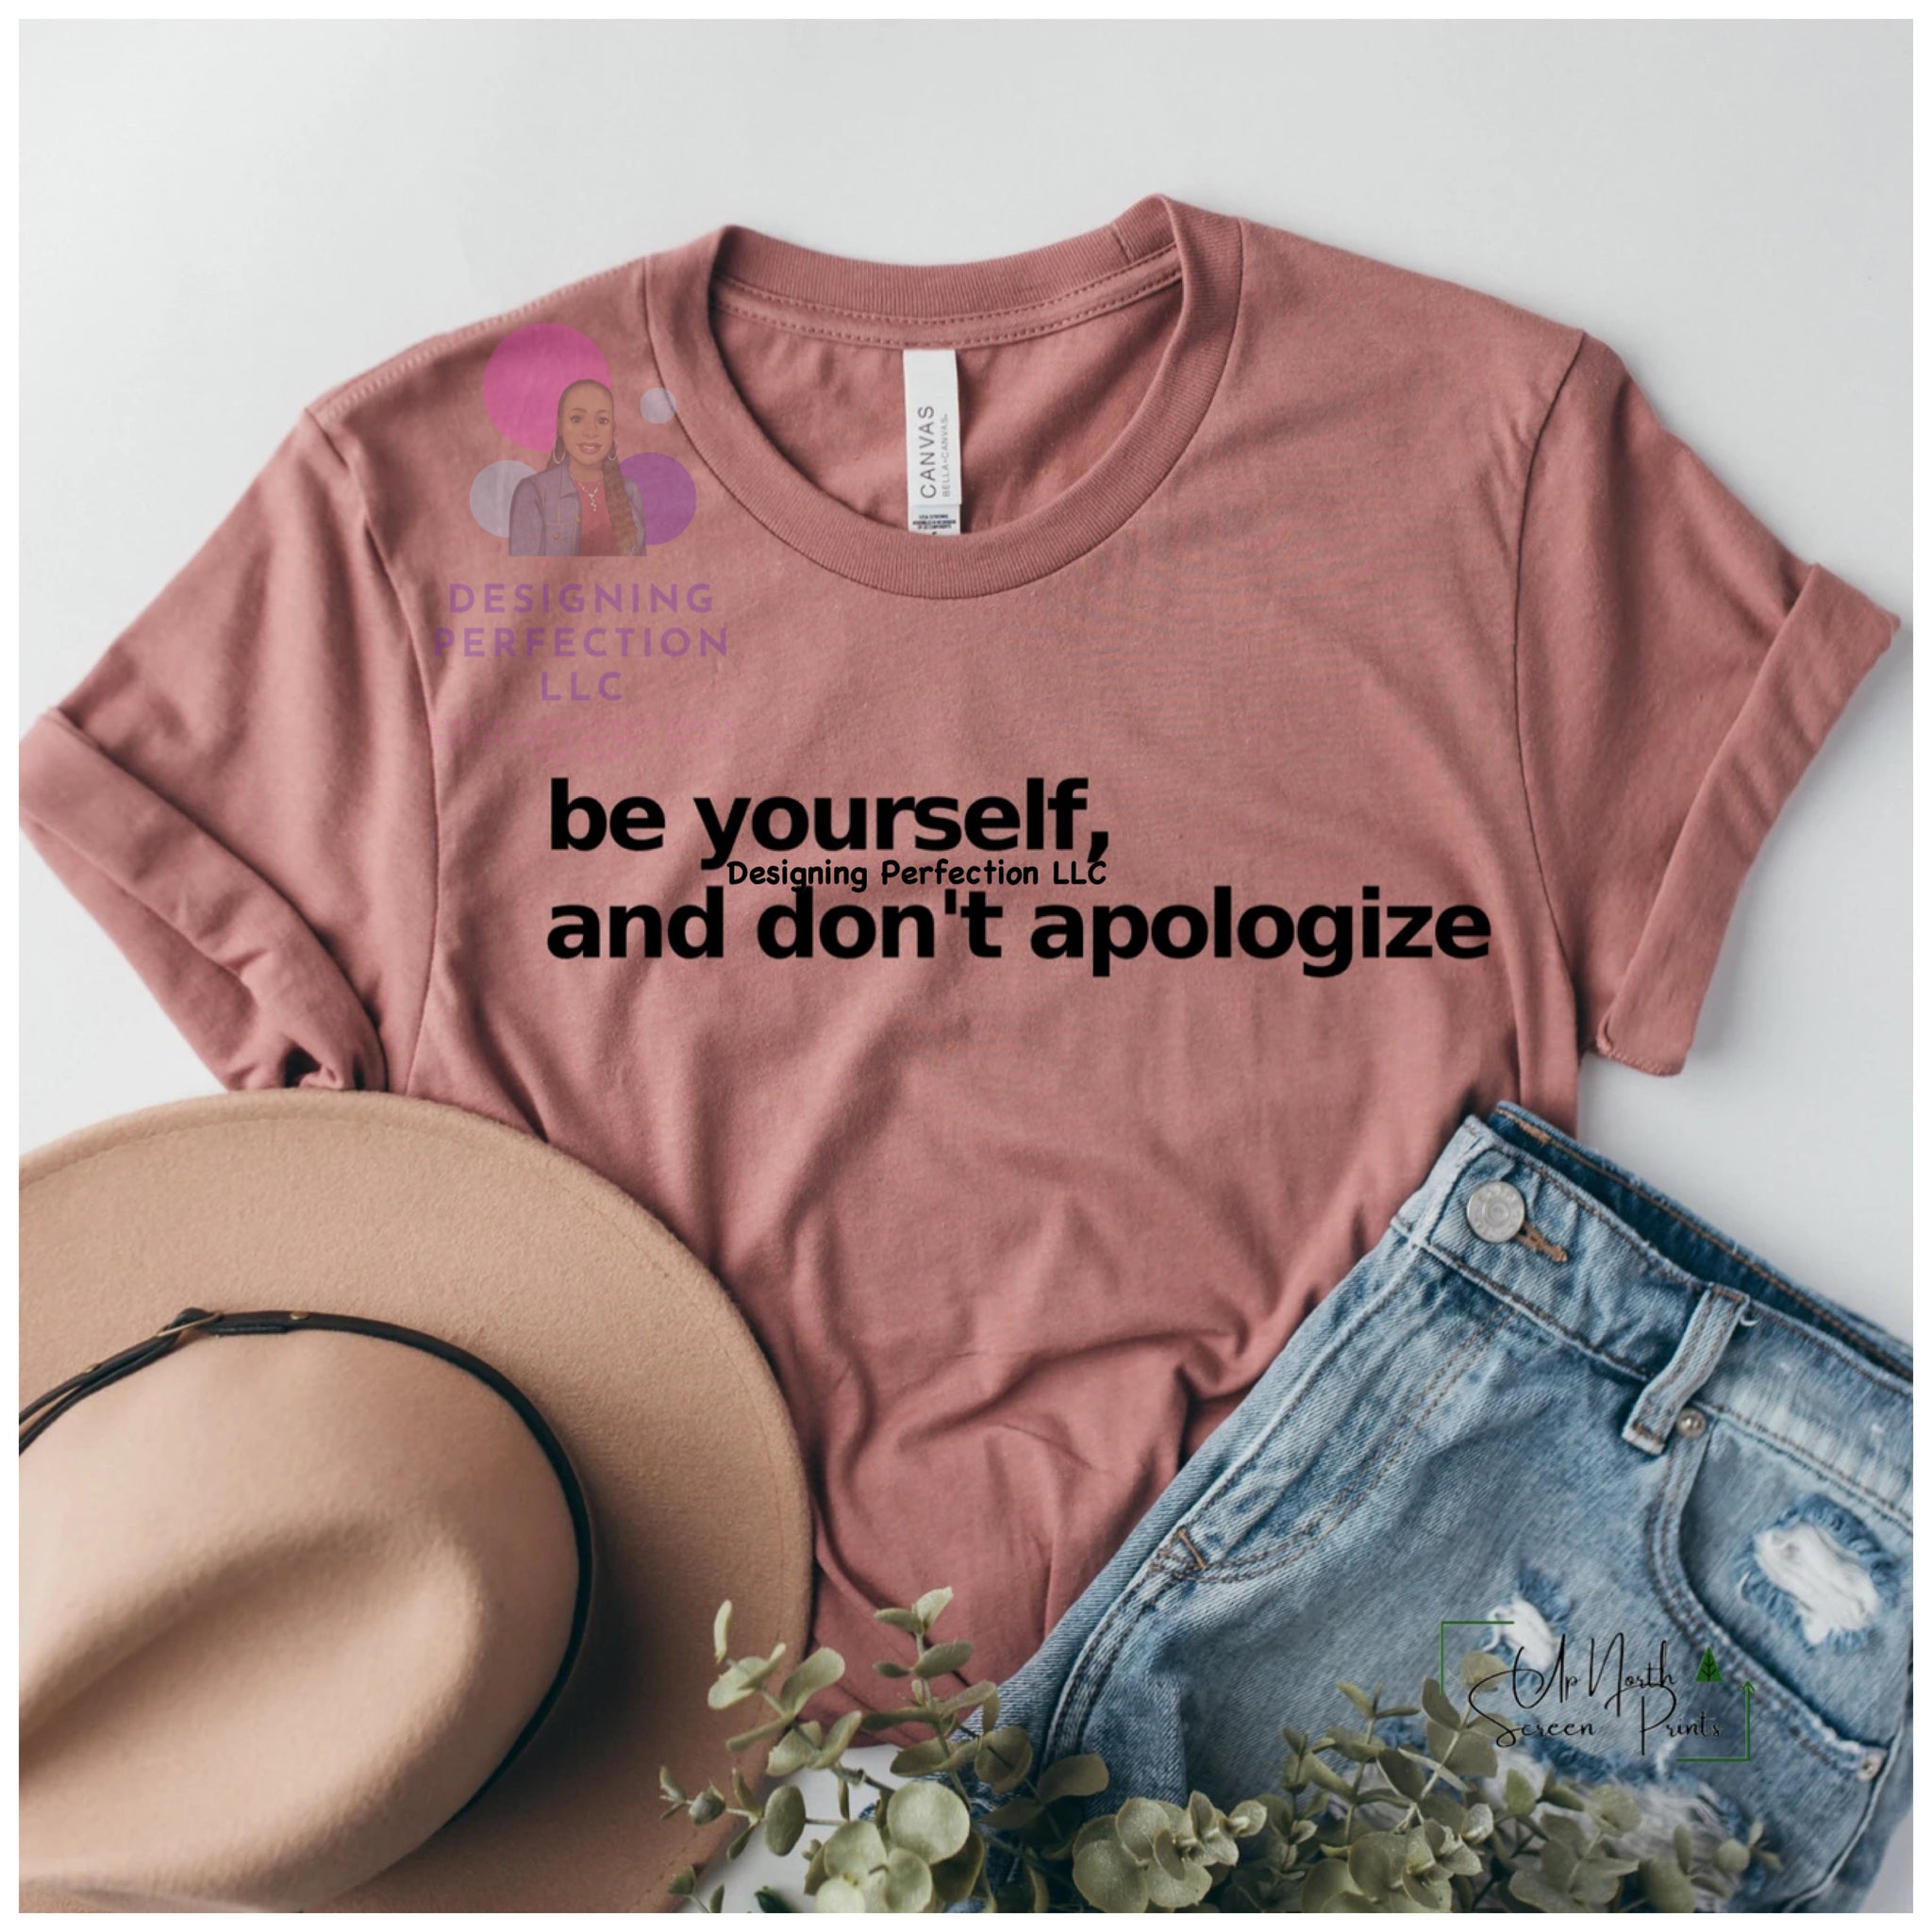 Be yourself and don’t apologize (B1)